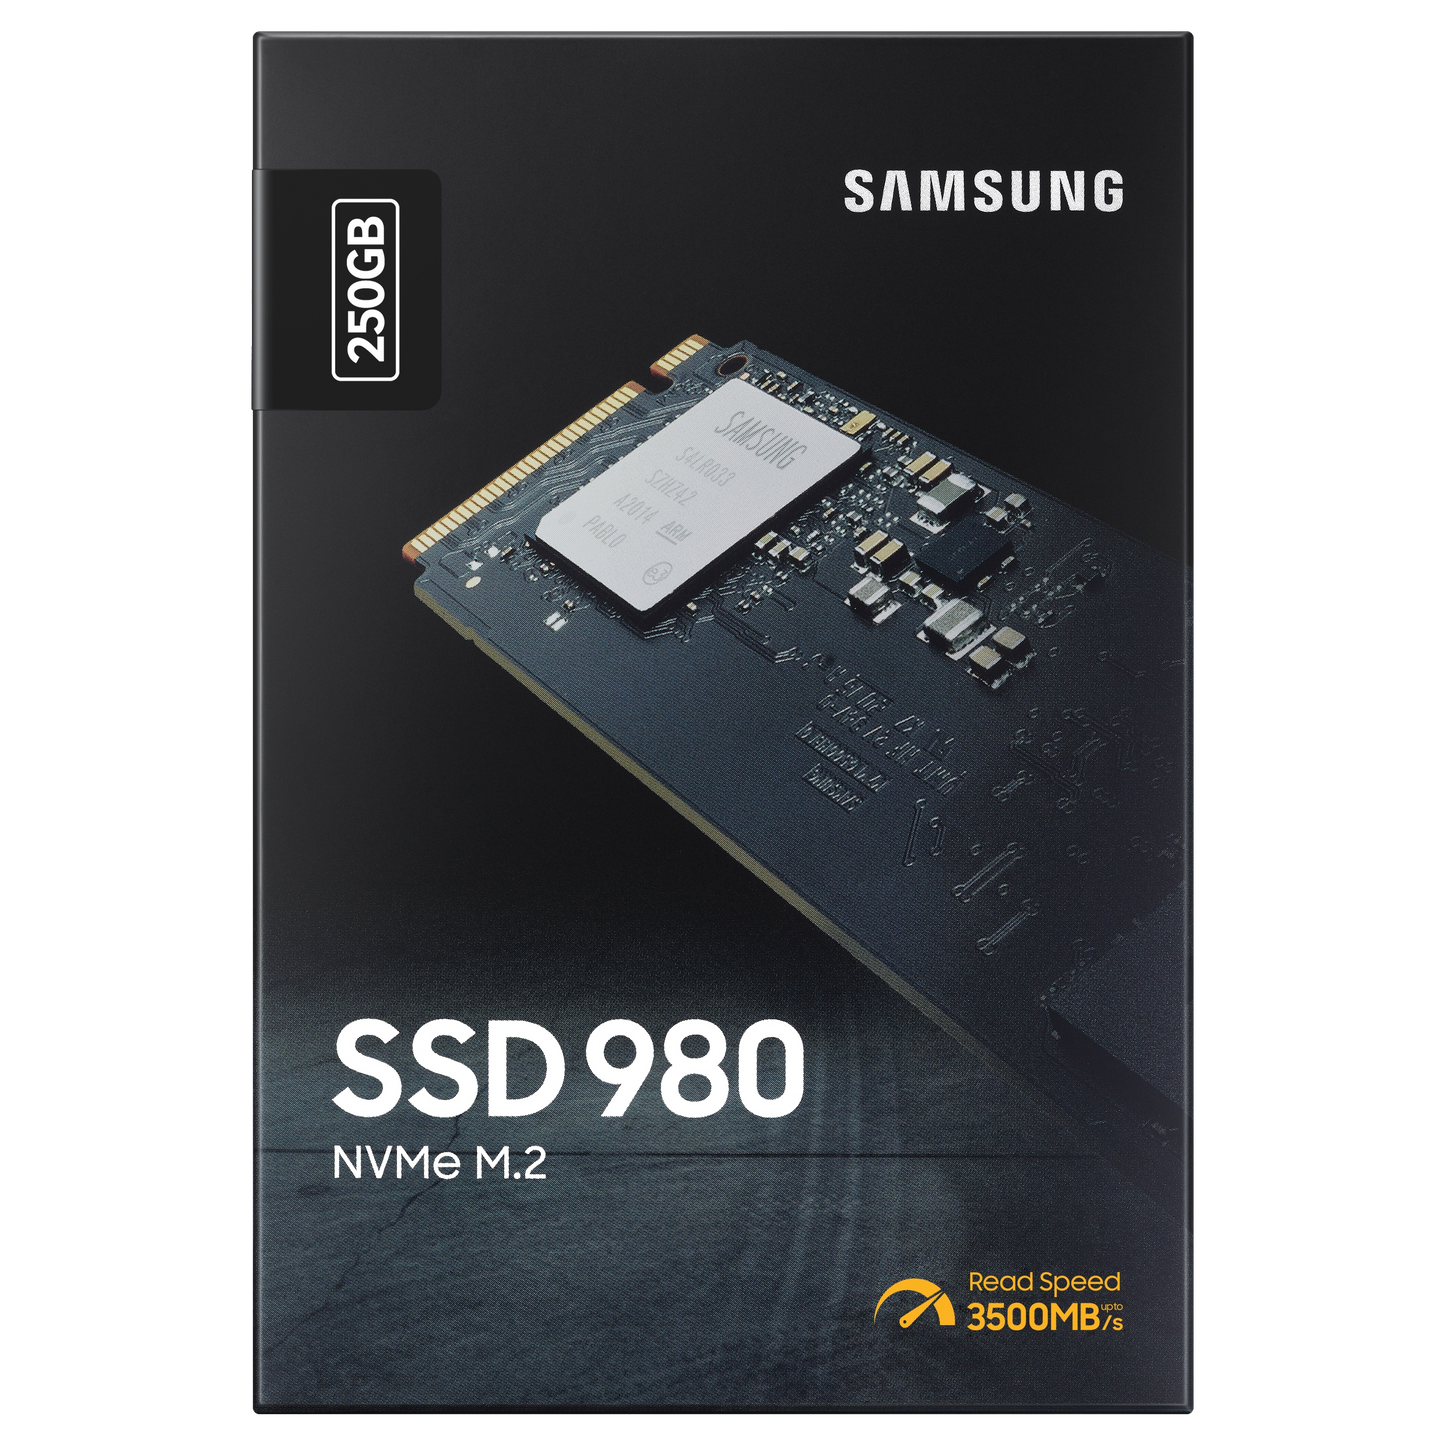 Samsung 980 250GB NVMe M.2 Internal Solid State Drive